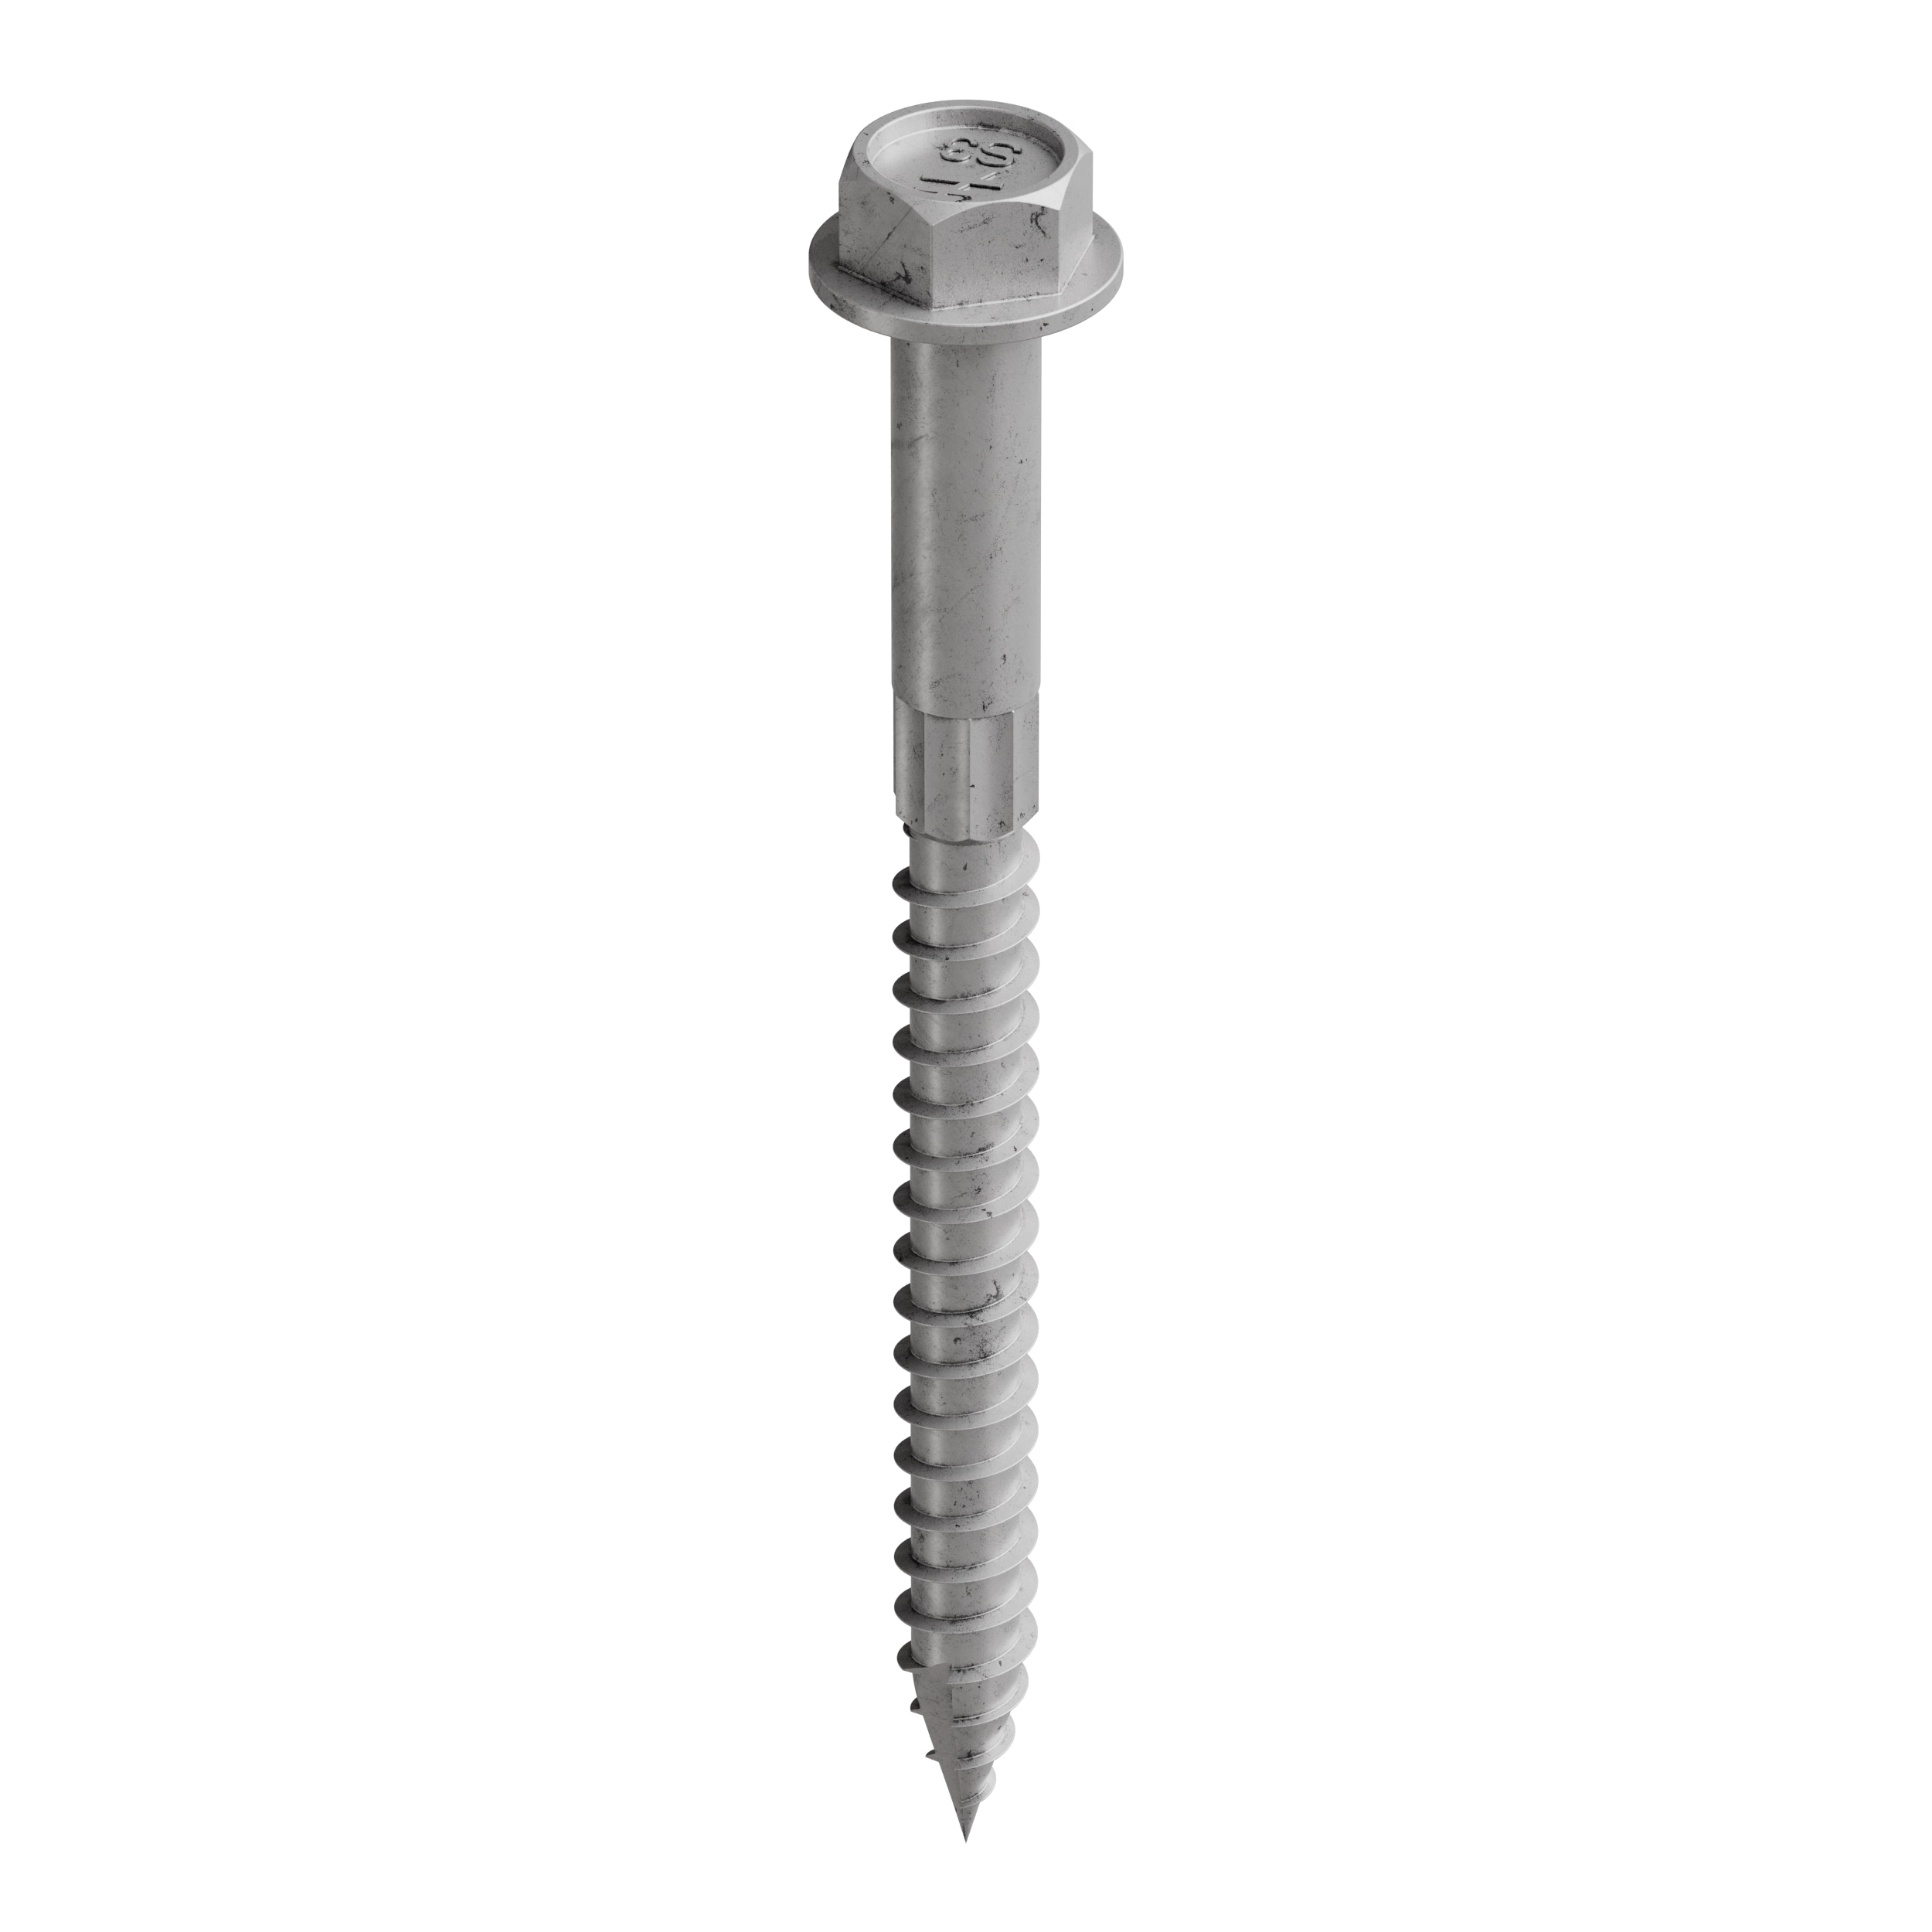 4 Boxes SDS25212-R25 Simpson Strong Tie SDS25212-R25 Hex Head Wood Screw 1/4-Inch x 2-1/2-Inch 100 Count 